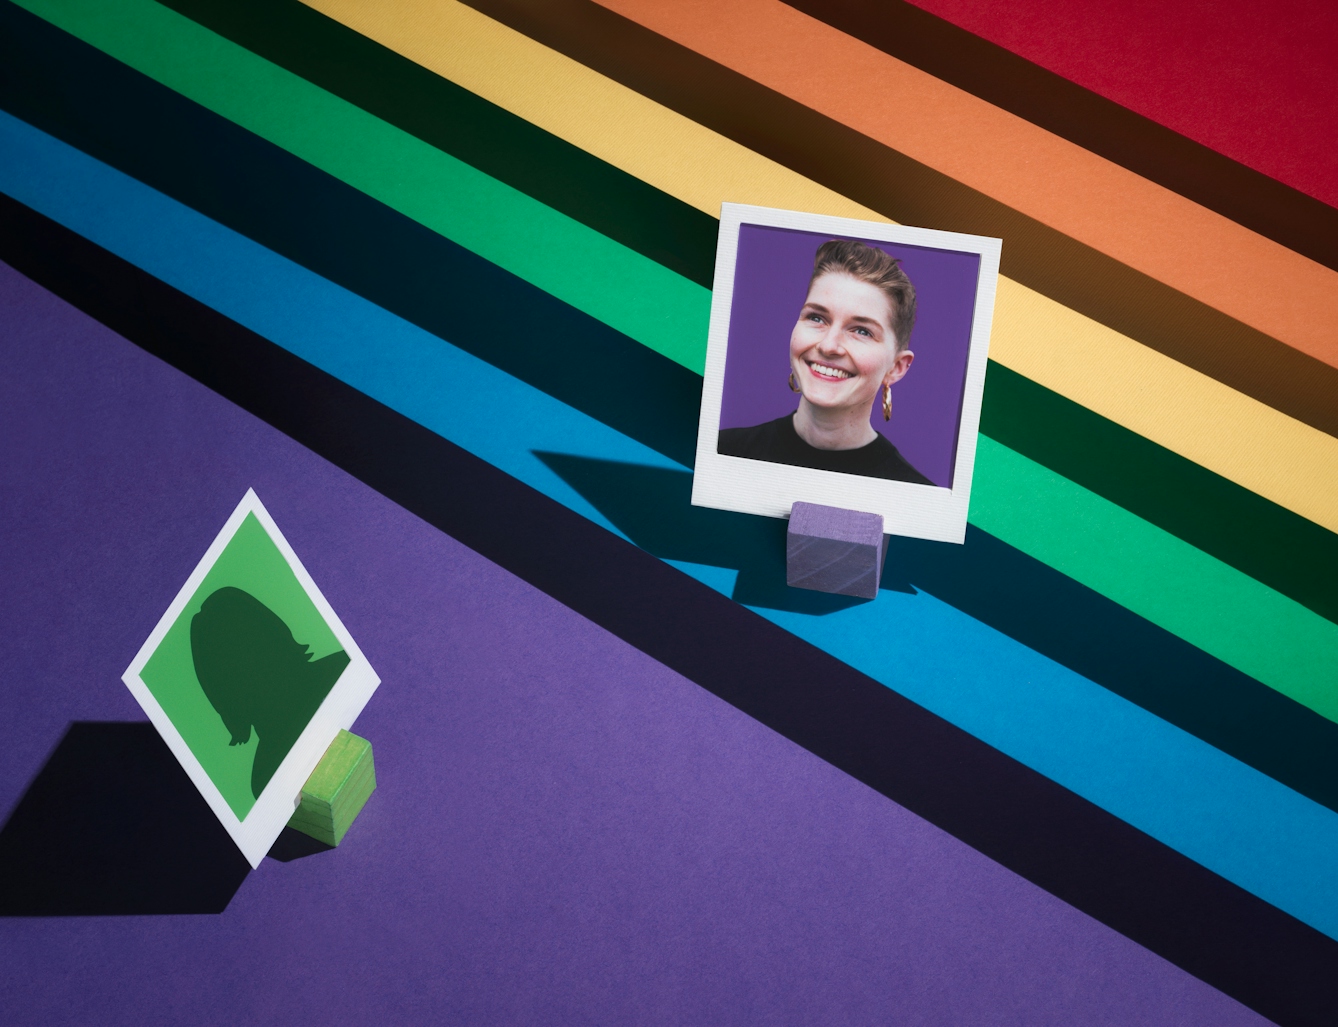 Photograph of a tiered set made up of the LGBTQ+ colours of red, orange, yellow, green, blue and purple.  The tiers form a diagonal line.  On the first tier, the blue one, the portrait of a woman against a purple background is framed in a small white frame.  Below this image, to the left, an anonymous figure on a green background is facing towards her.